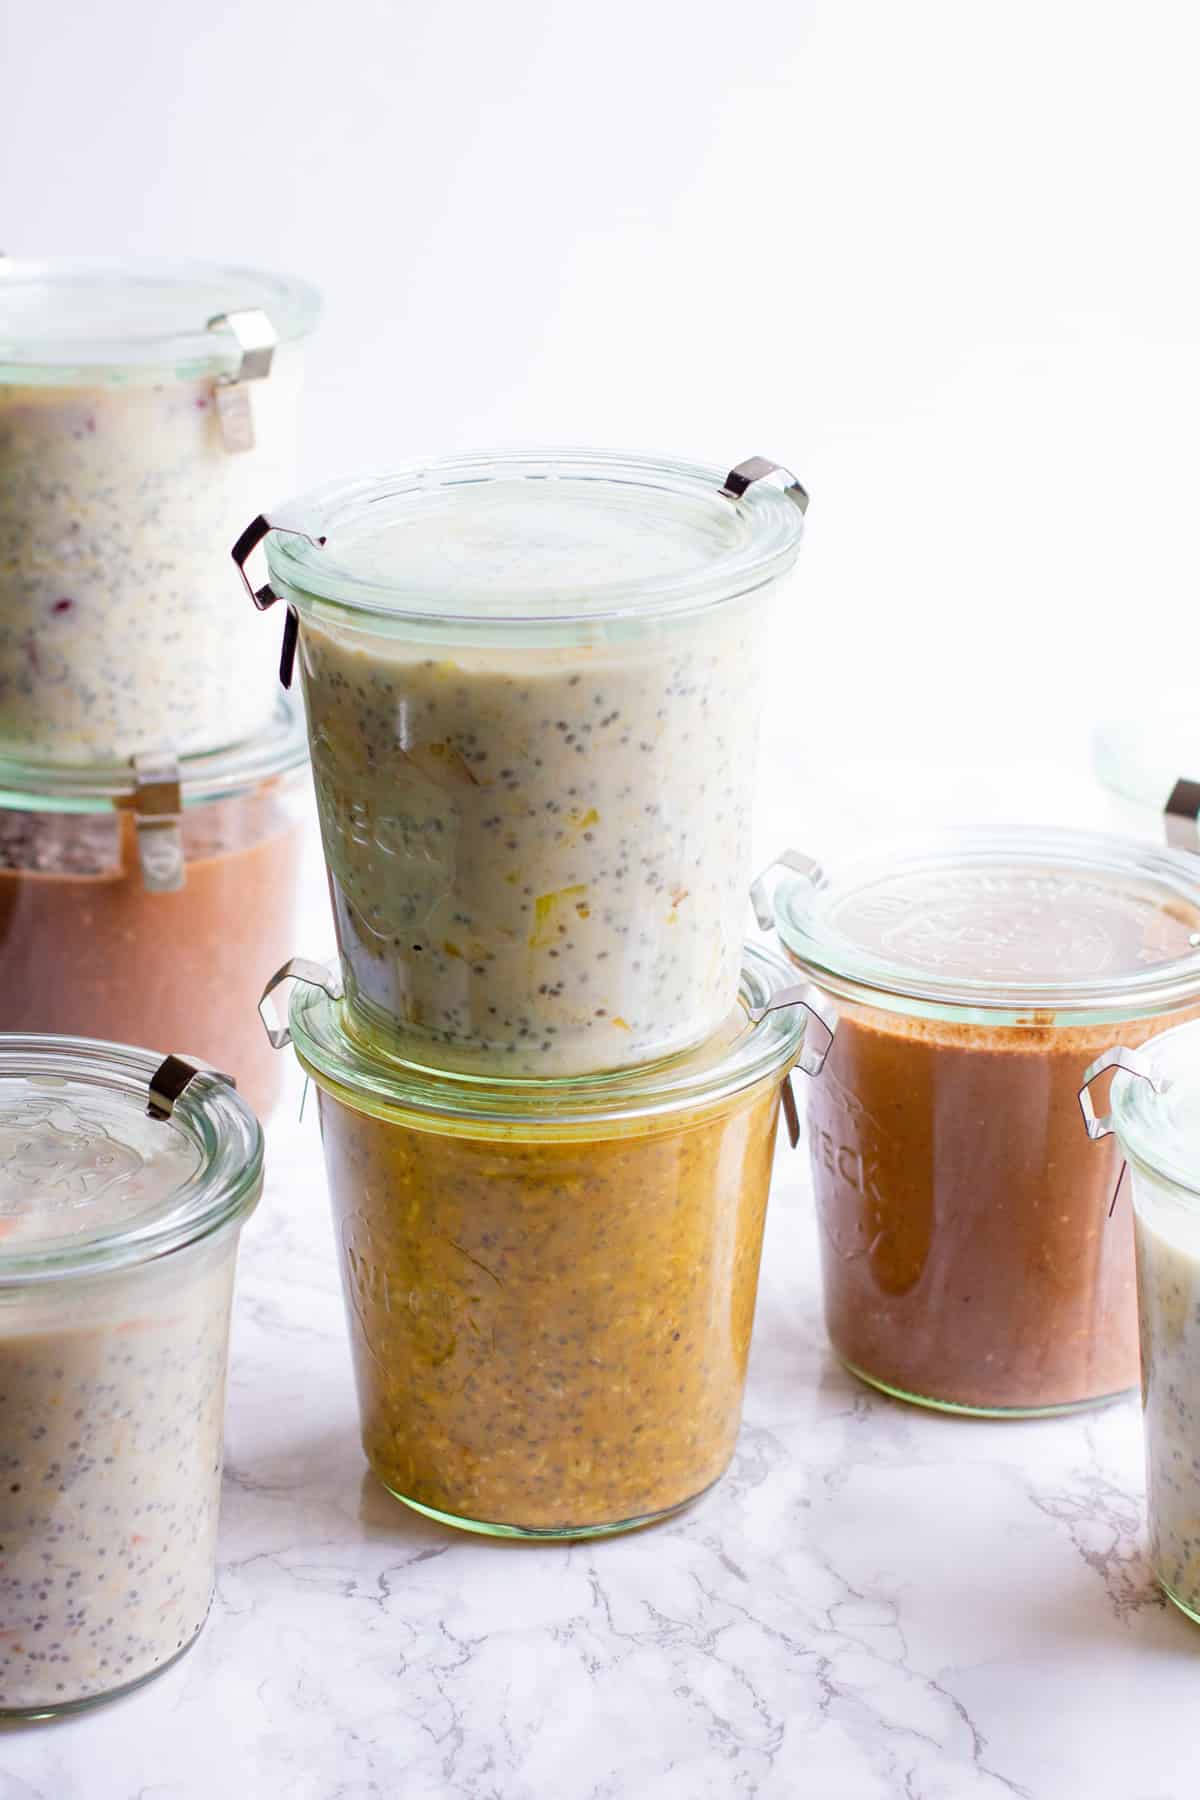 Closed jars of different flavors of overnight oats are stacked against a white background